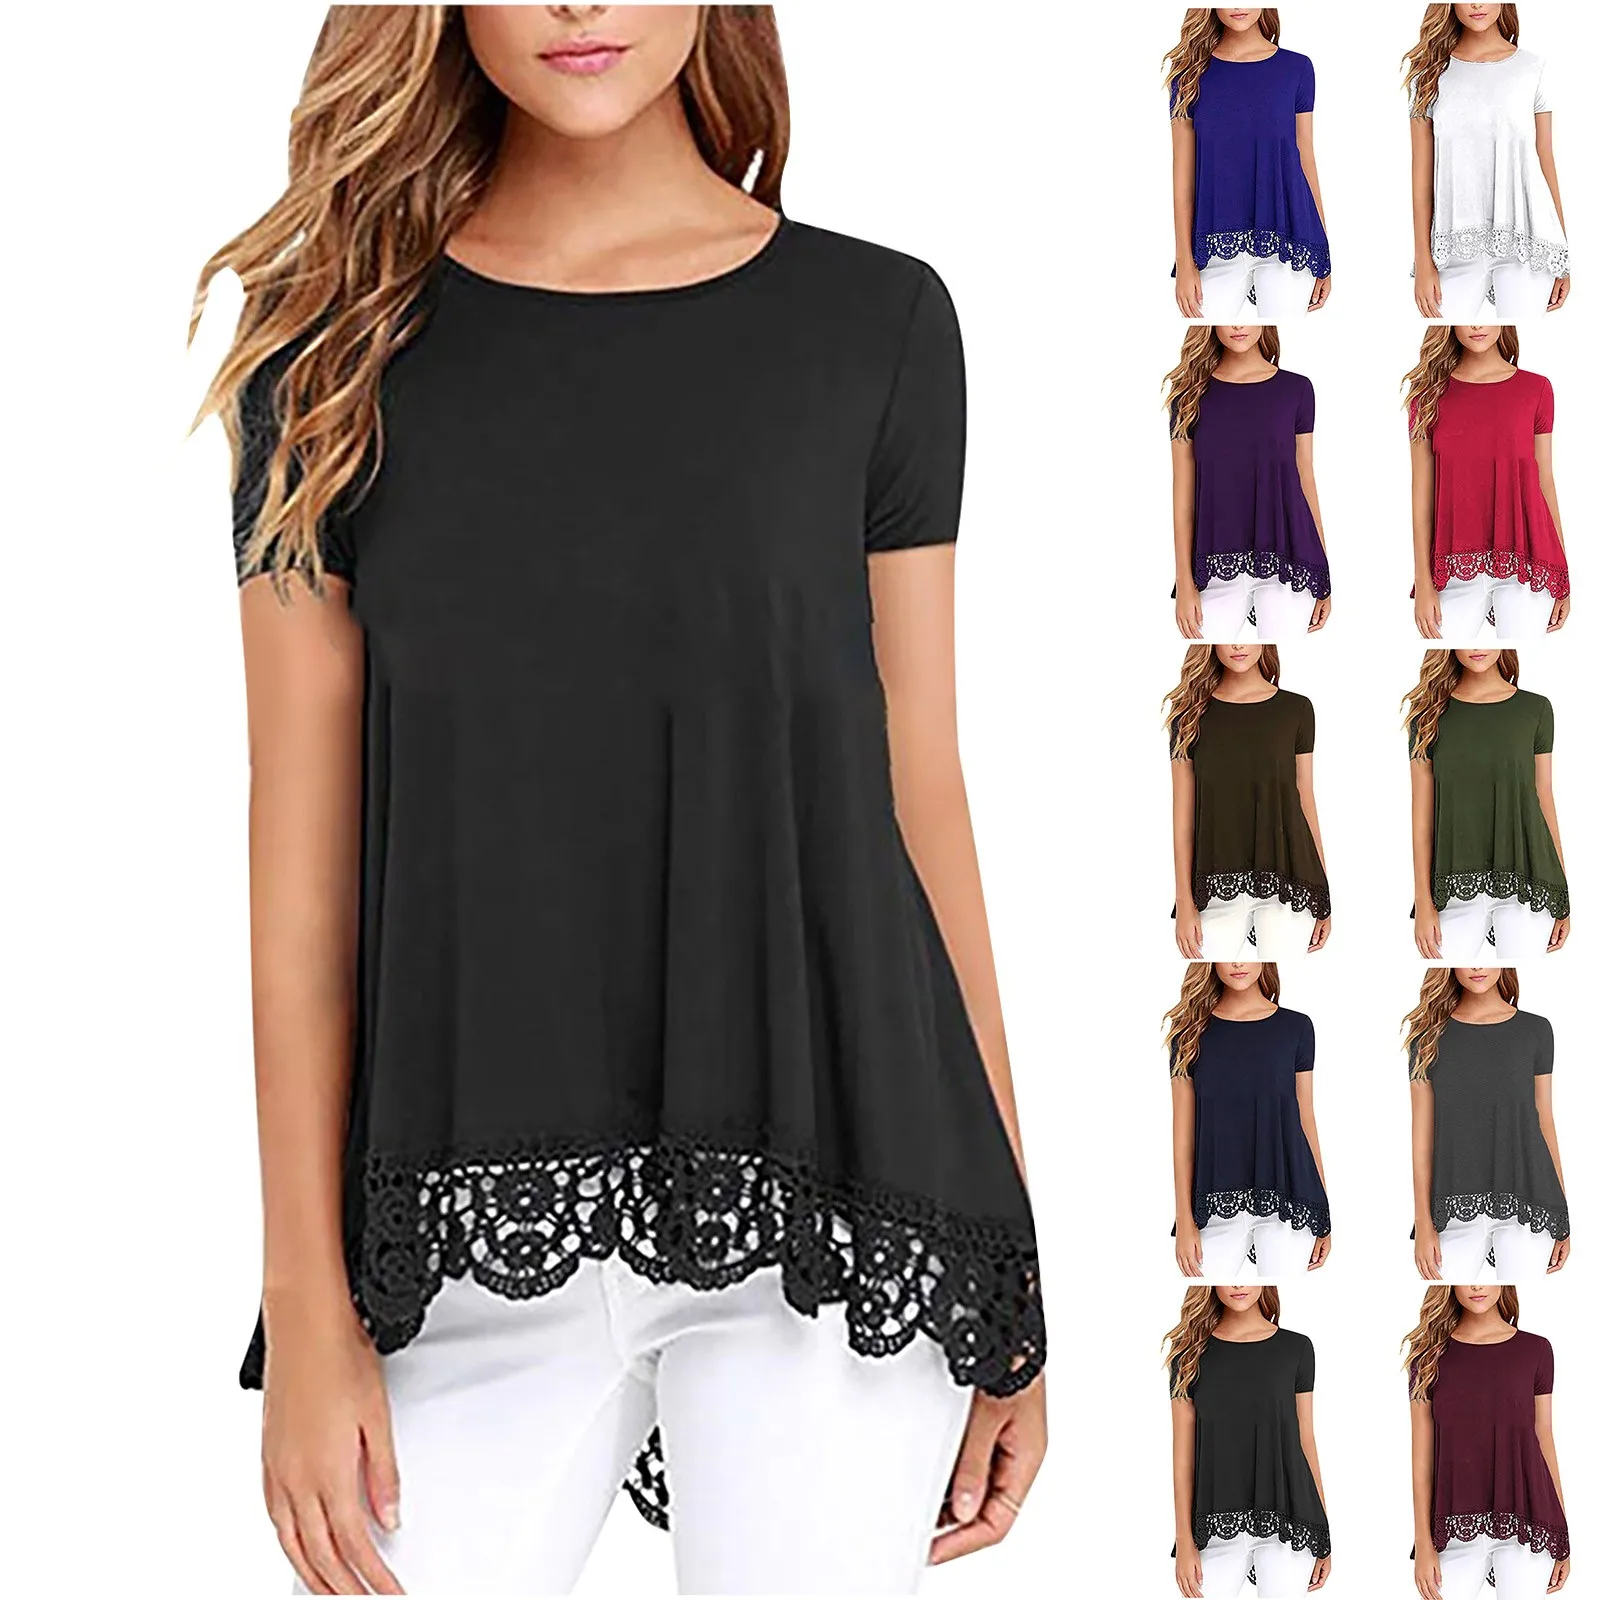 Women Casual O-Neck Printing Short Sleeve Loose Hem Lace Patchwork Tops Tunic Blouse